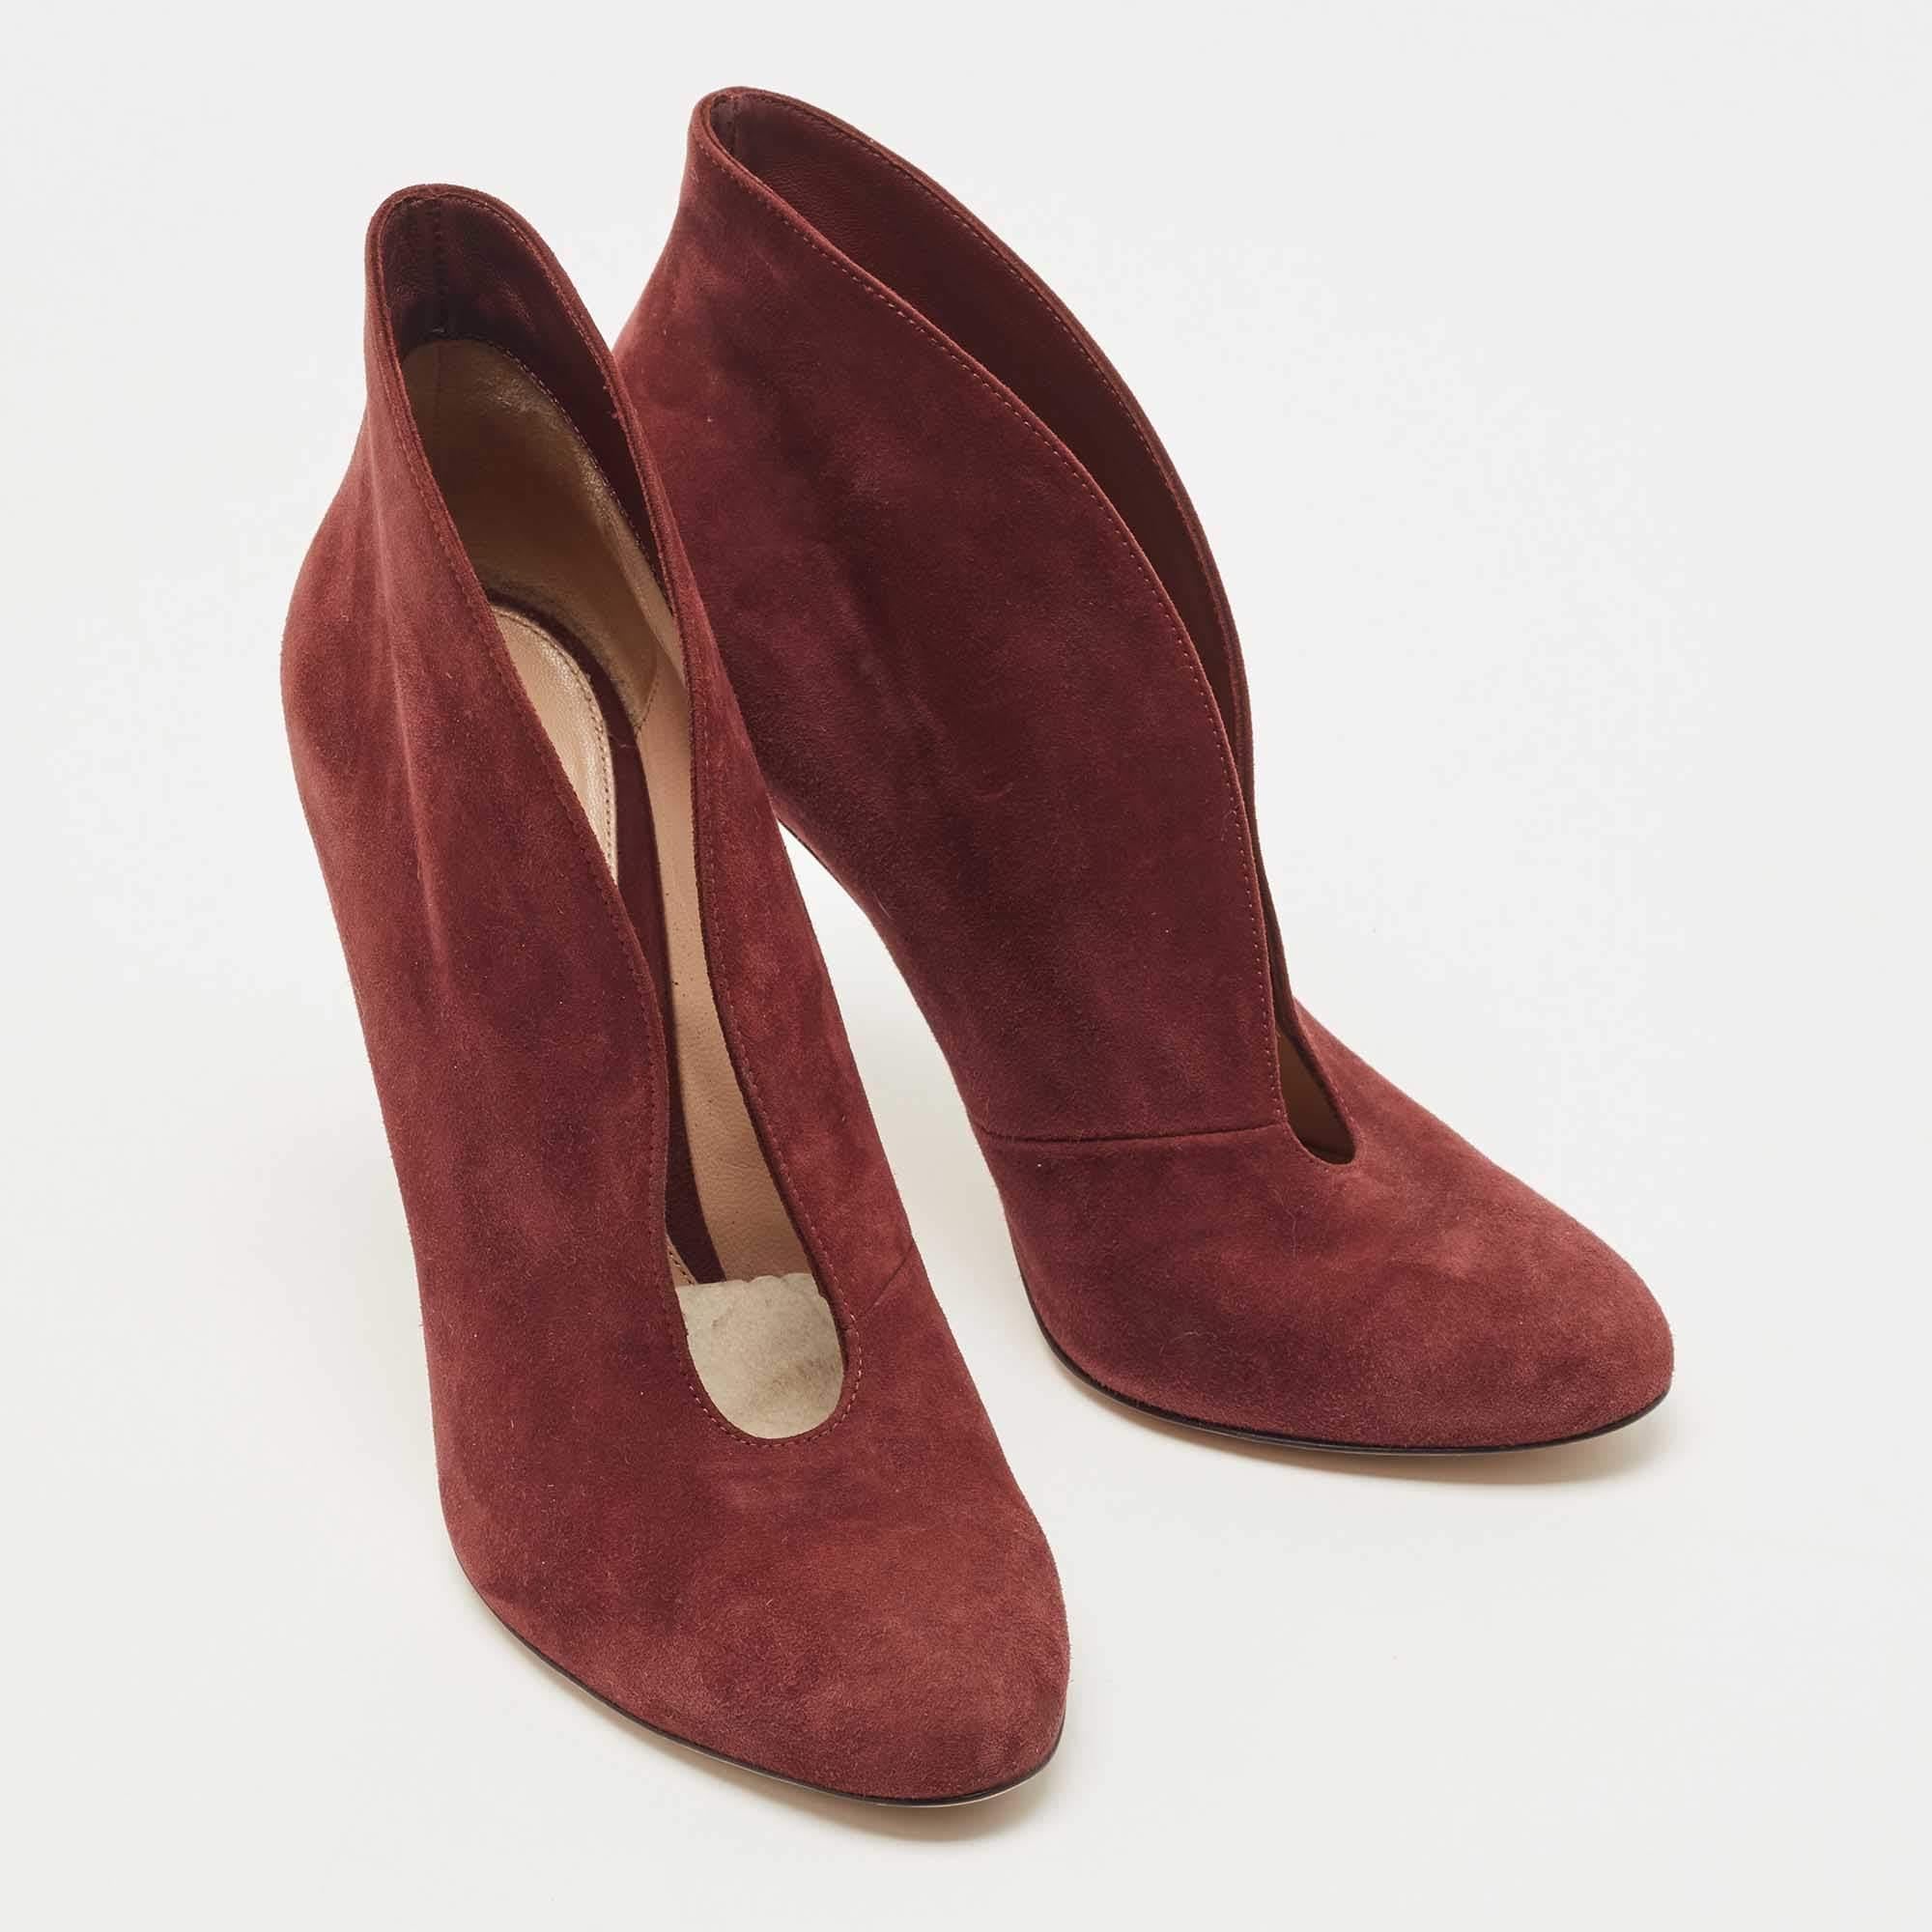 Brown Gianvito Rossi Burgundy Suede Vamp Ankle Length Boots Size 38.5